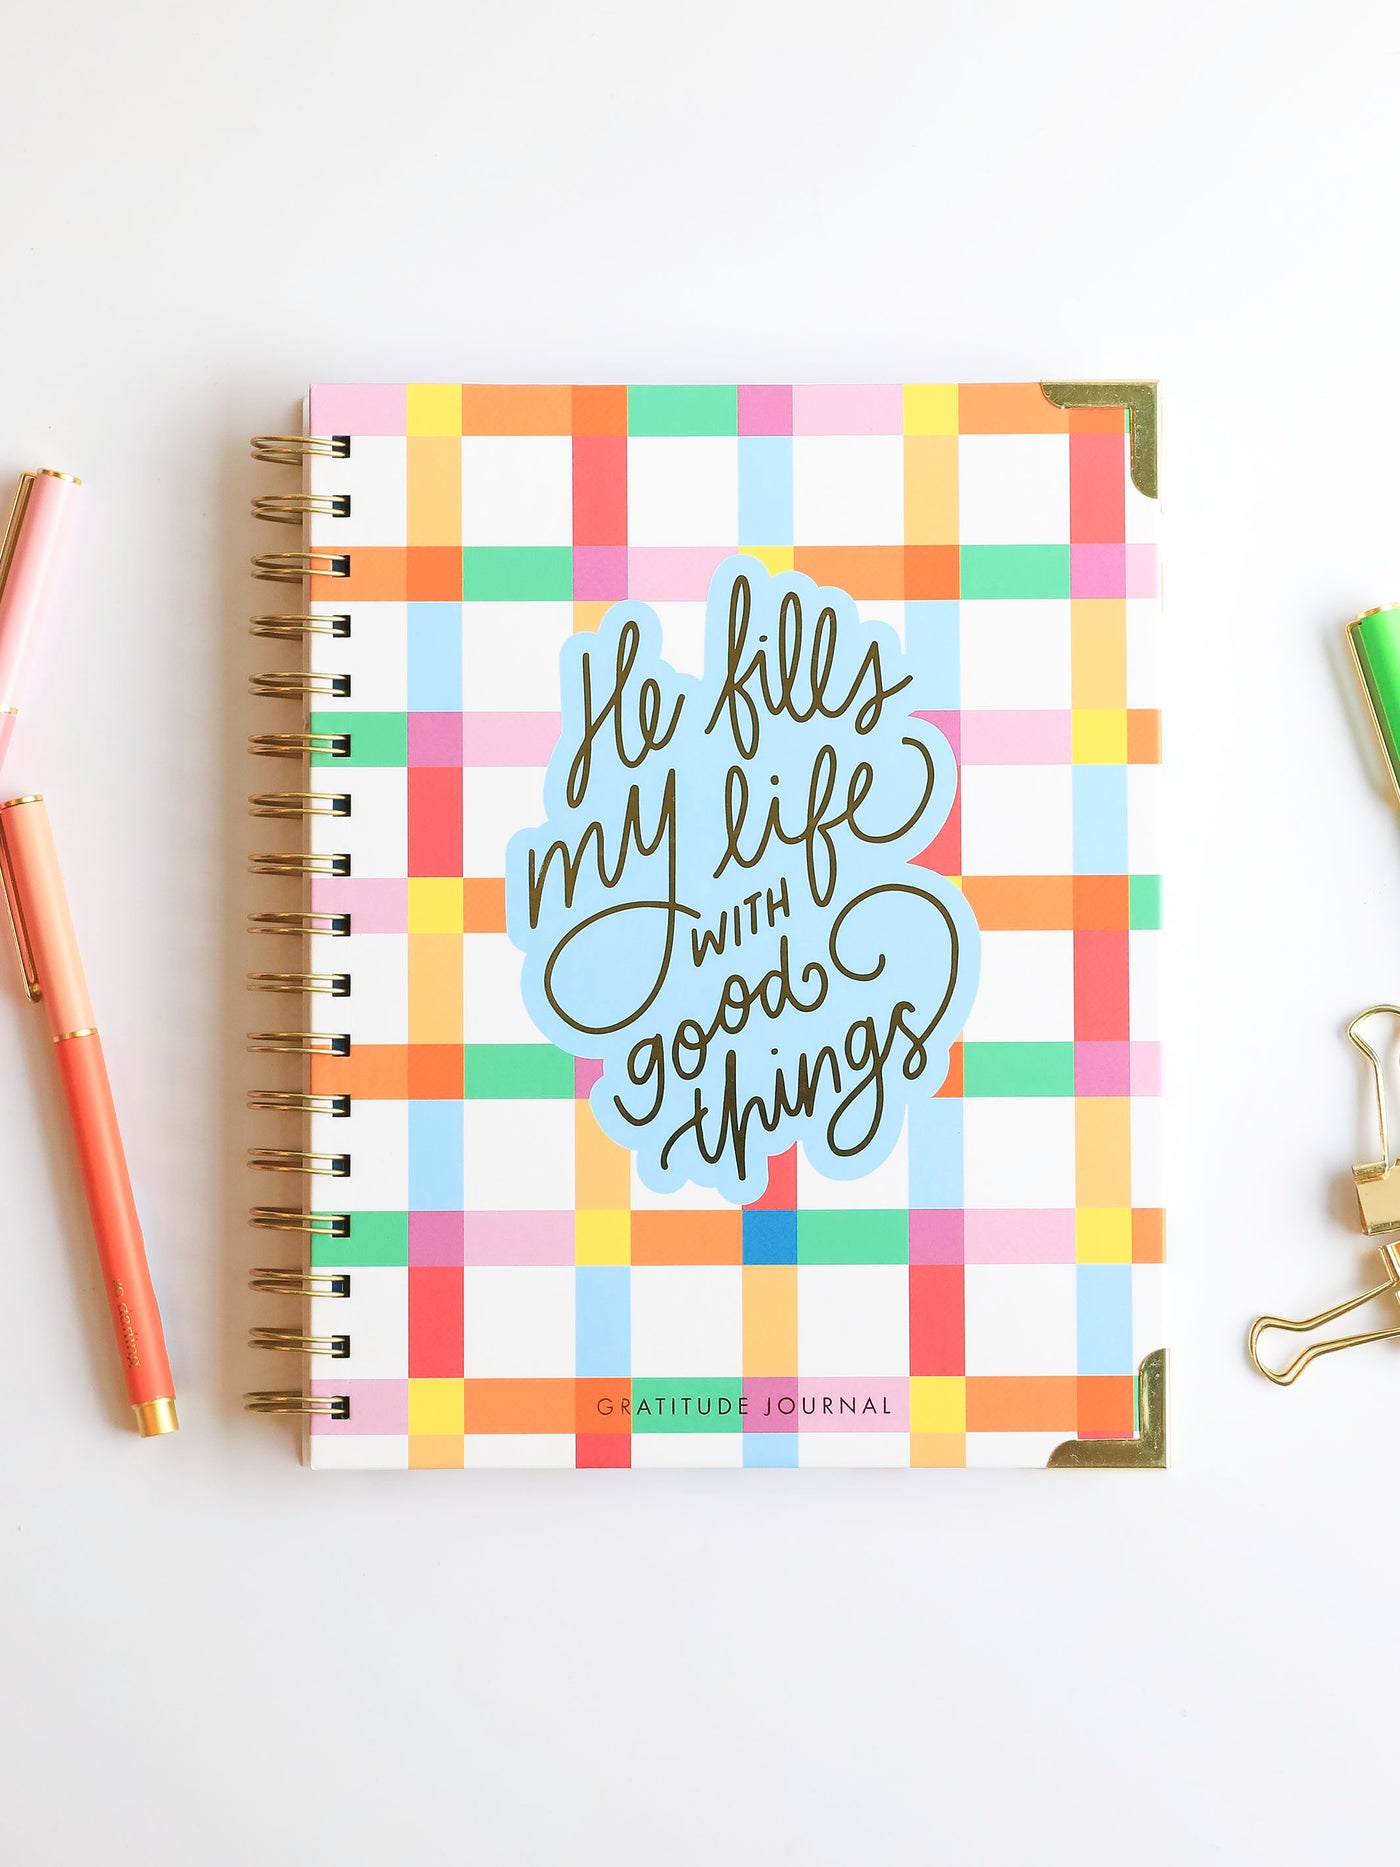 Gratitude Journal | With Good Things